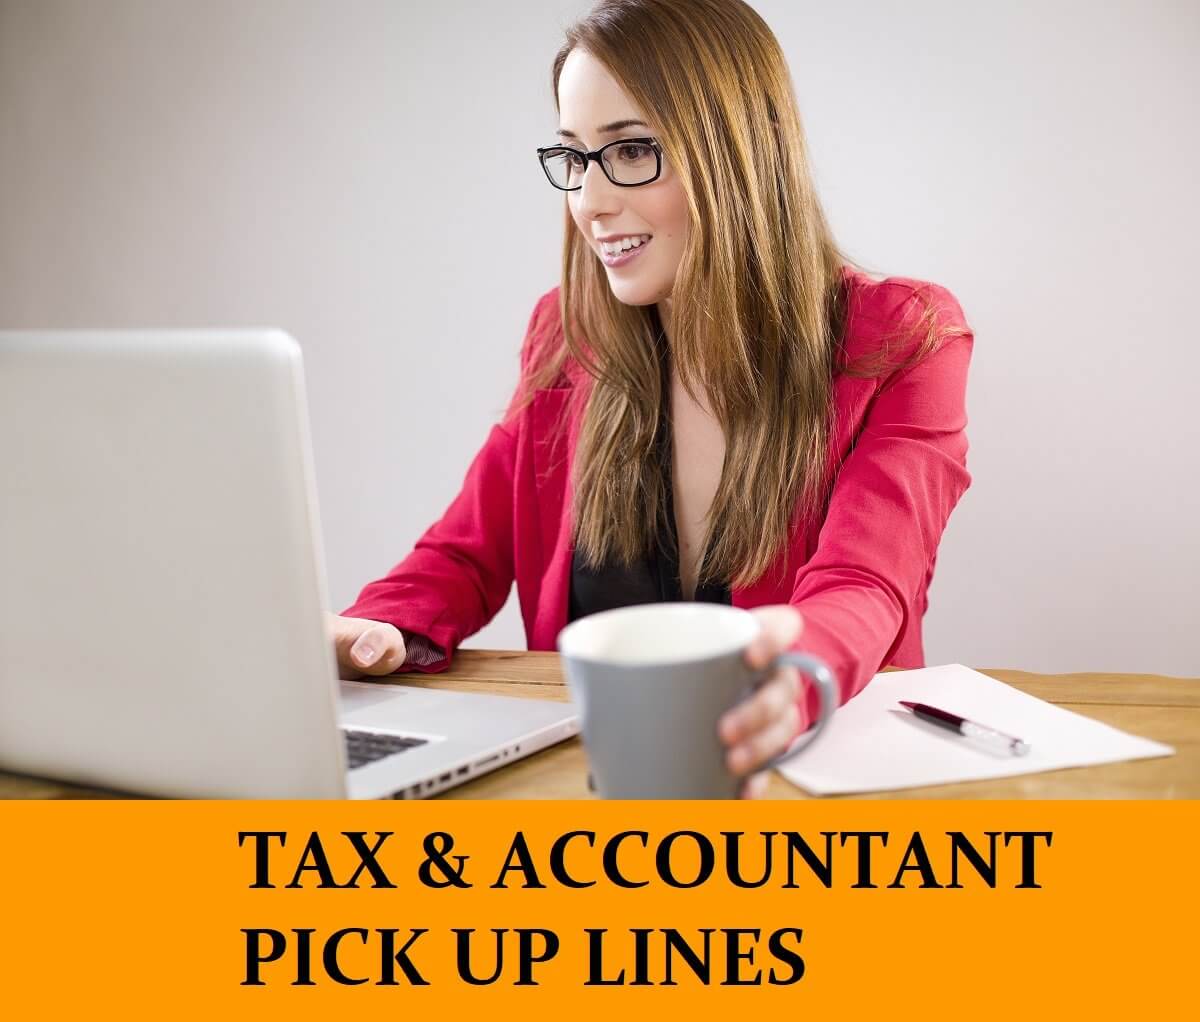 93 Tax Day Accountant Pick Up Lines [Funny, Dirty, Cheesy]